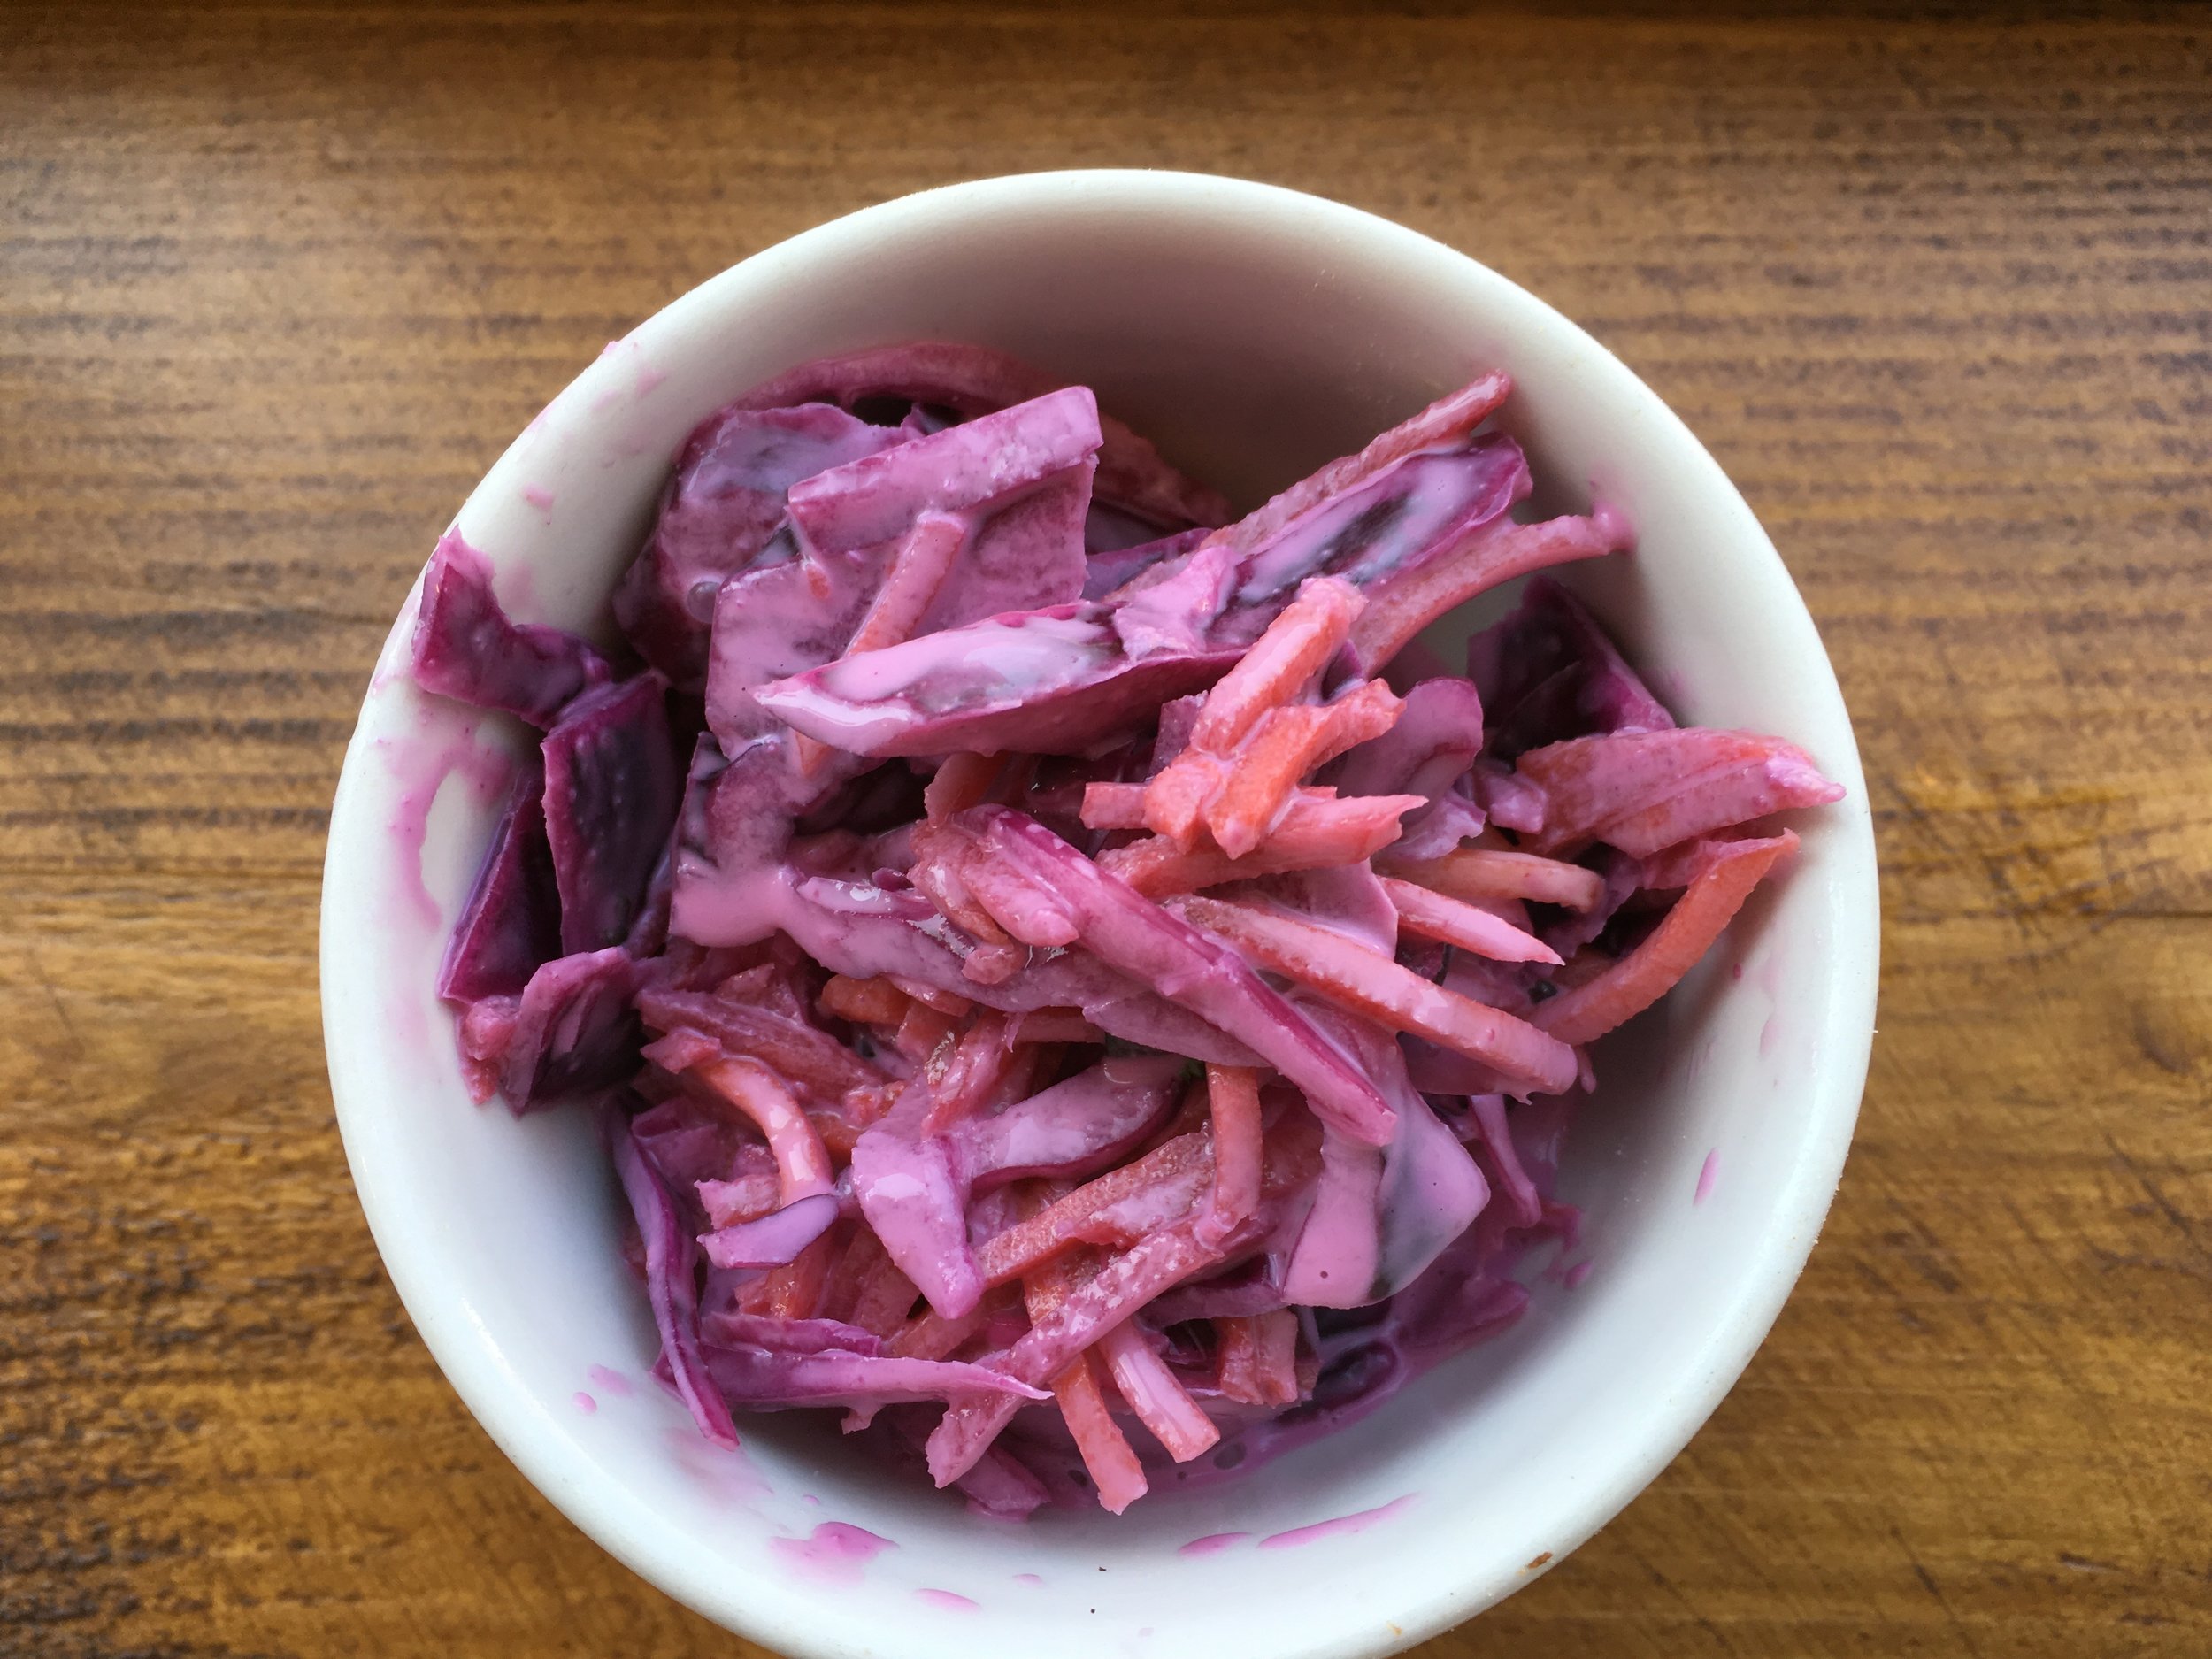 + lime/coriander slaw (with beet root/red cabbage)